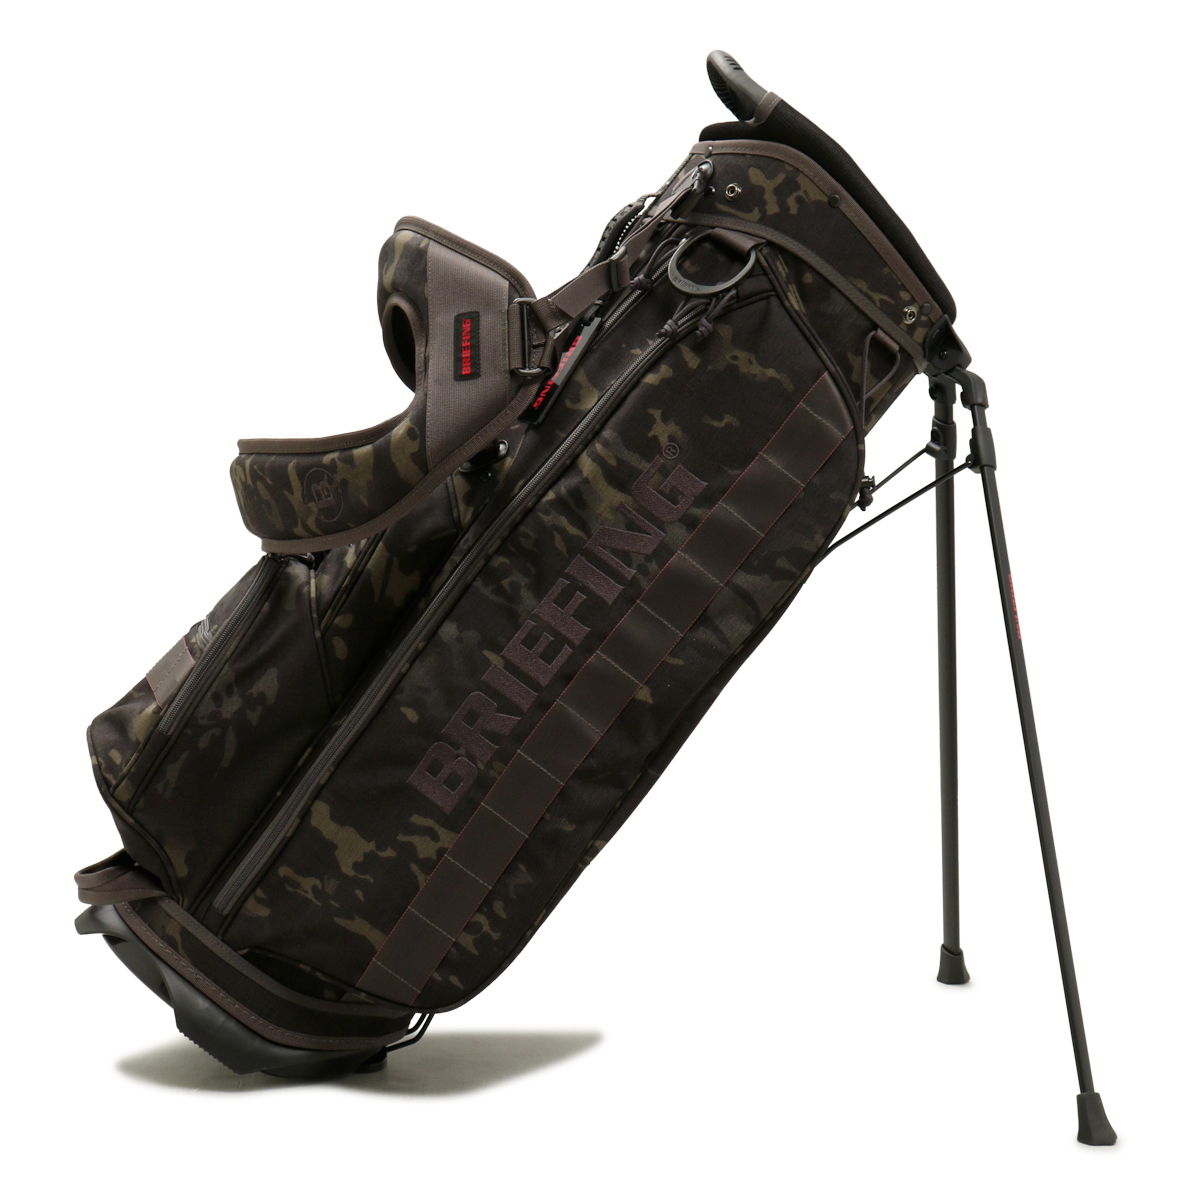  regular goods Briefing Golf caddy bag stand type 9.5 type 4 division 3.75kg CR-4 #03 1000D BRG231D08 BRIEFING water-repellent 